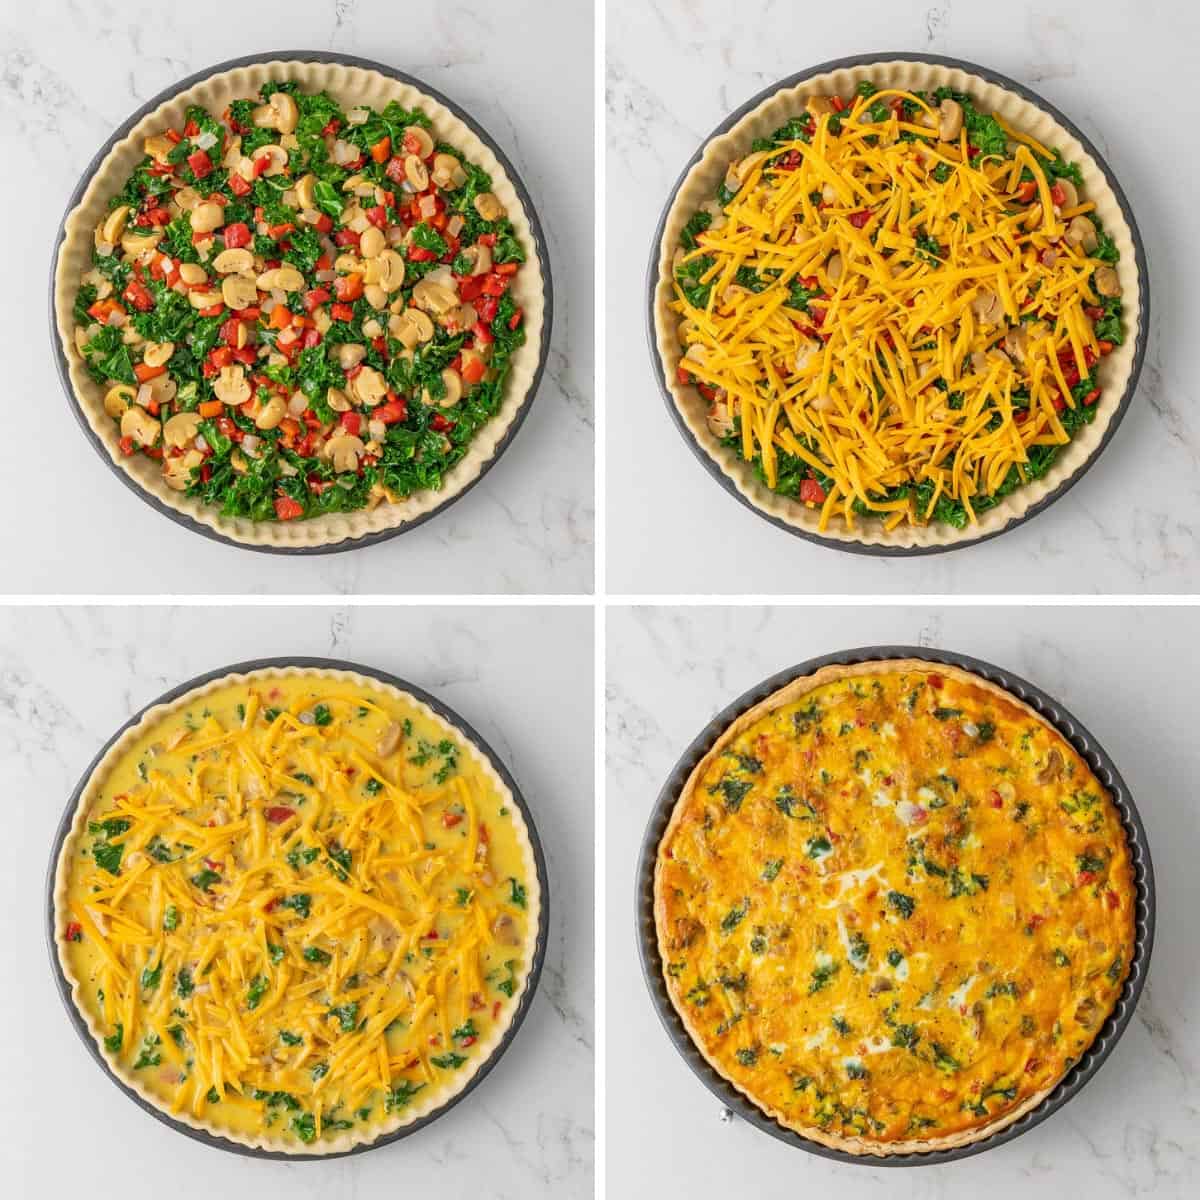 Step-by-step photos showing how to make kale quiche.